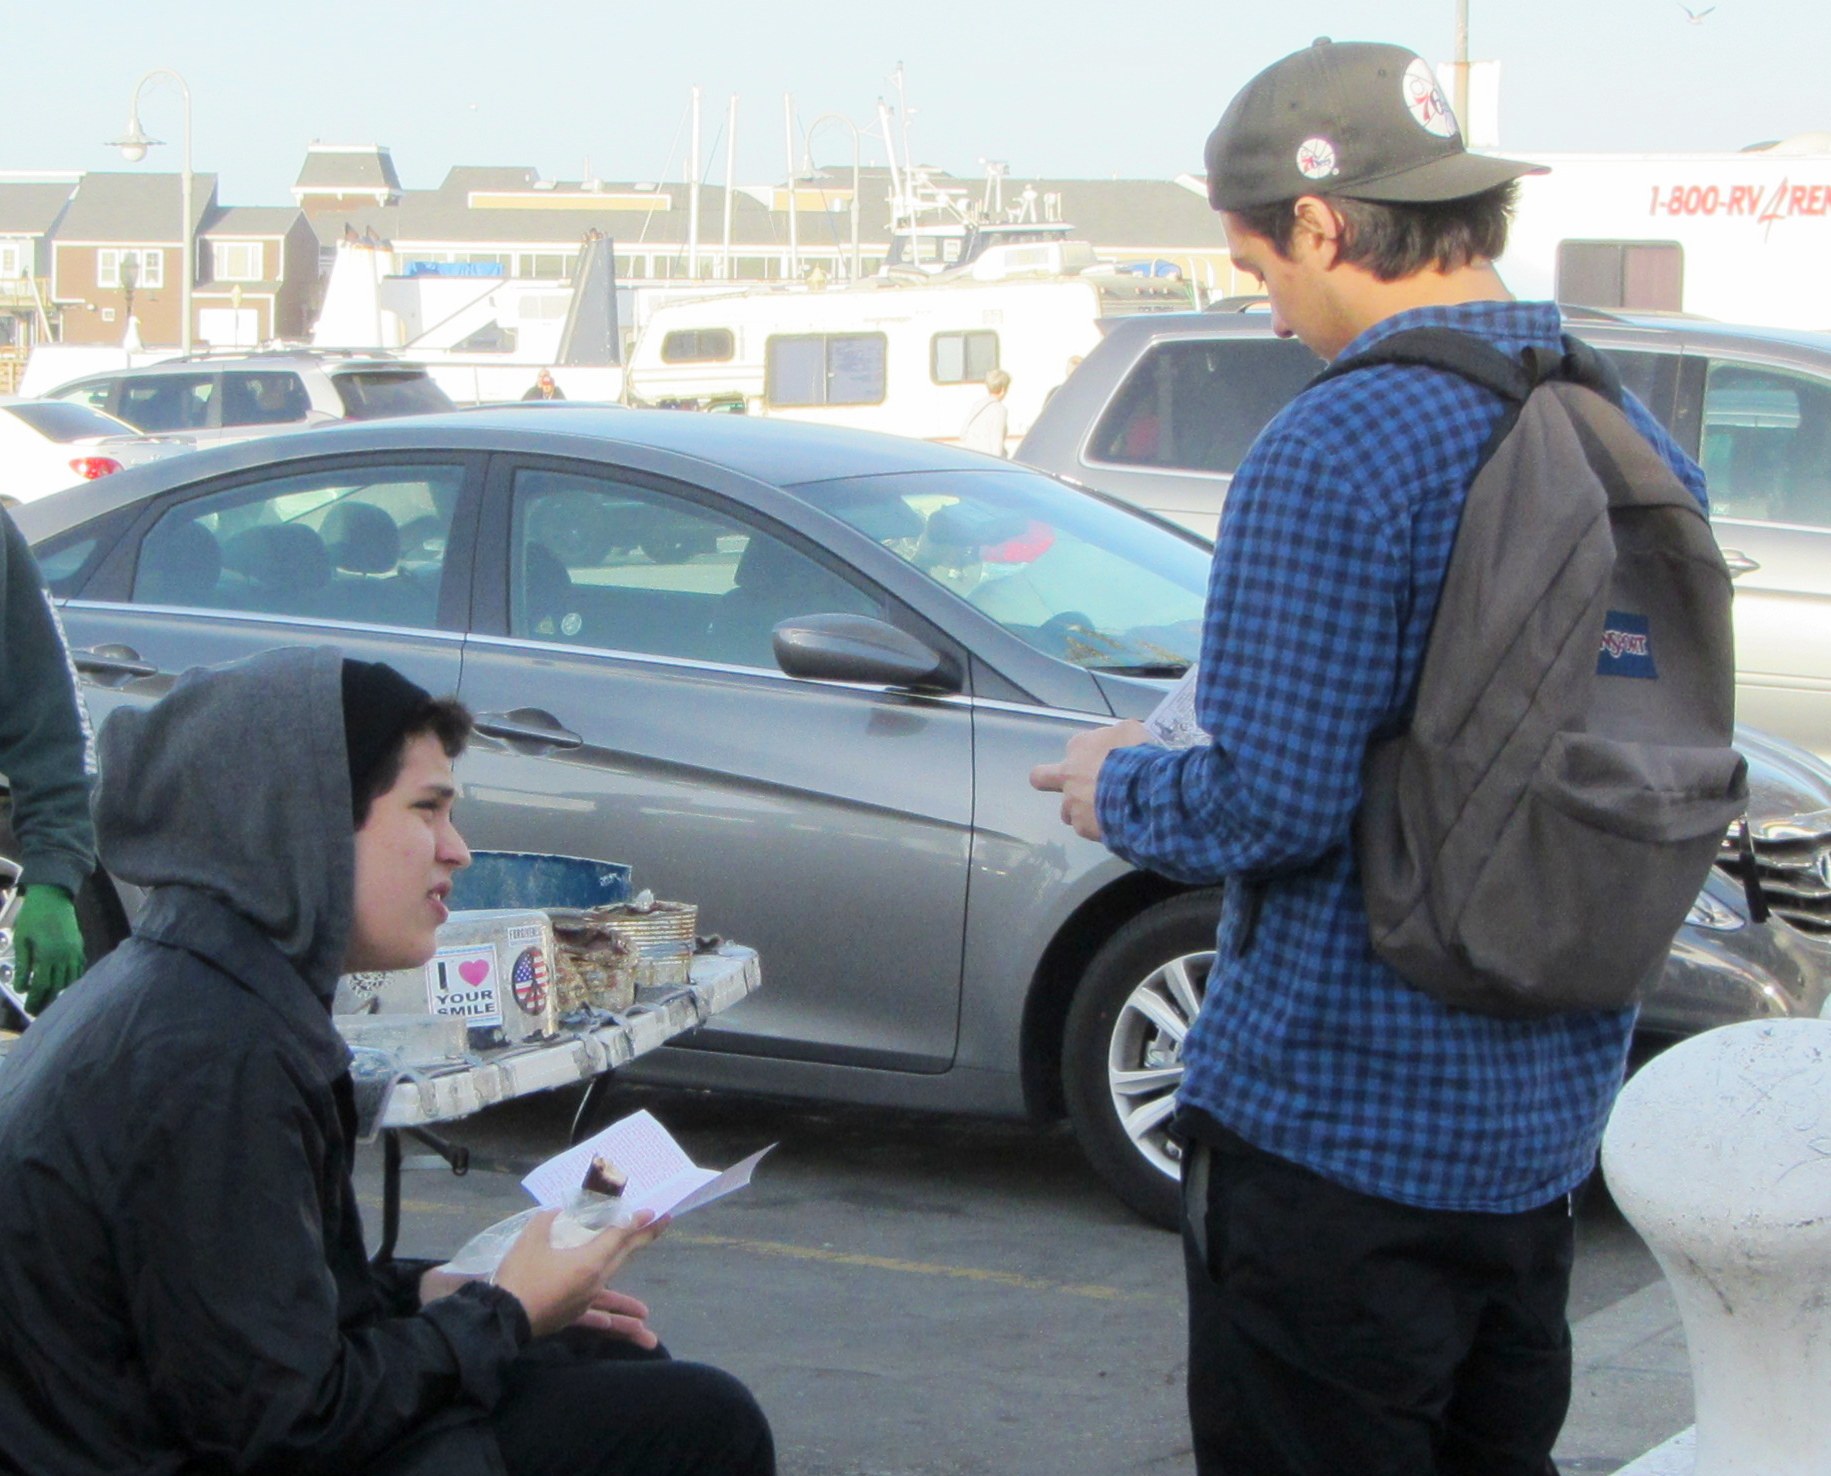 Tanis and Alex read tracts at Fisherman’s Wharf